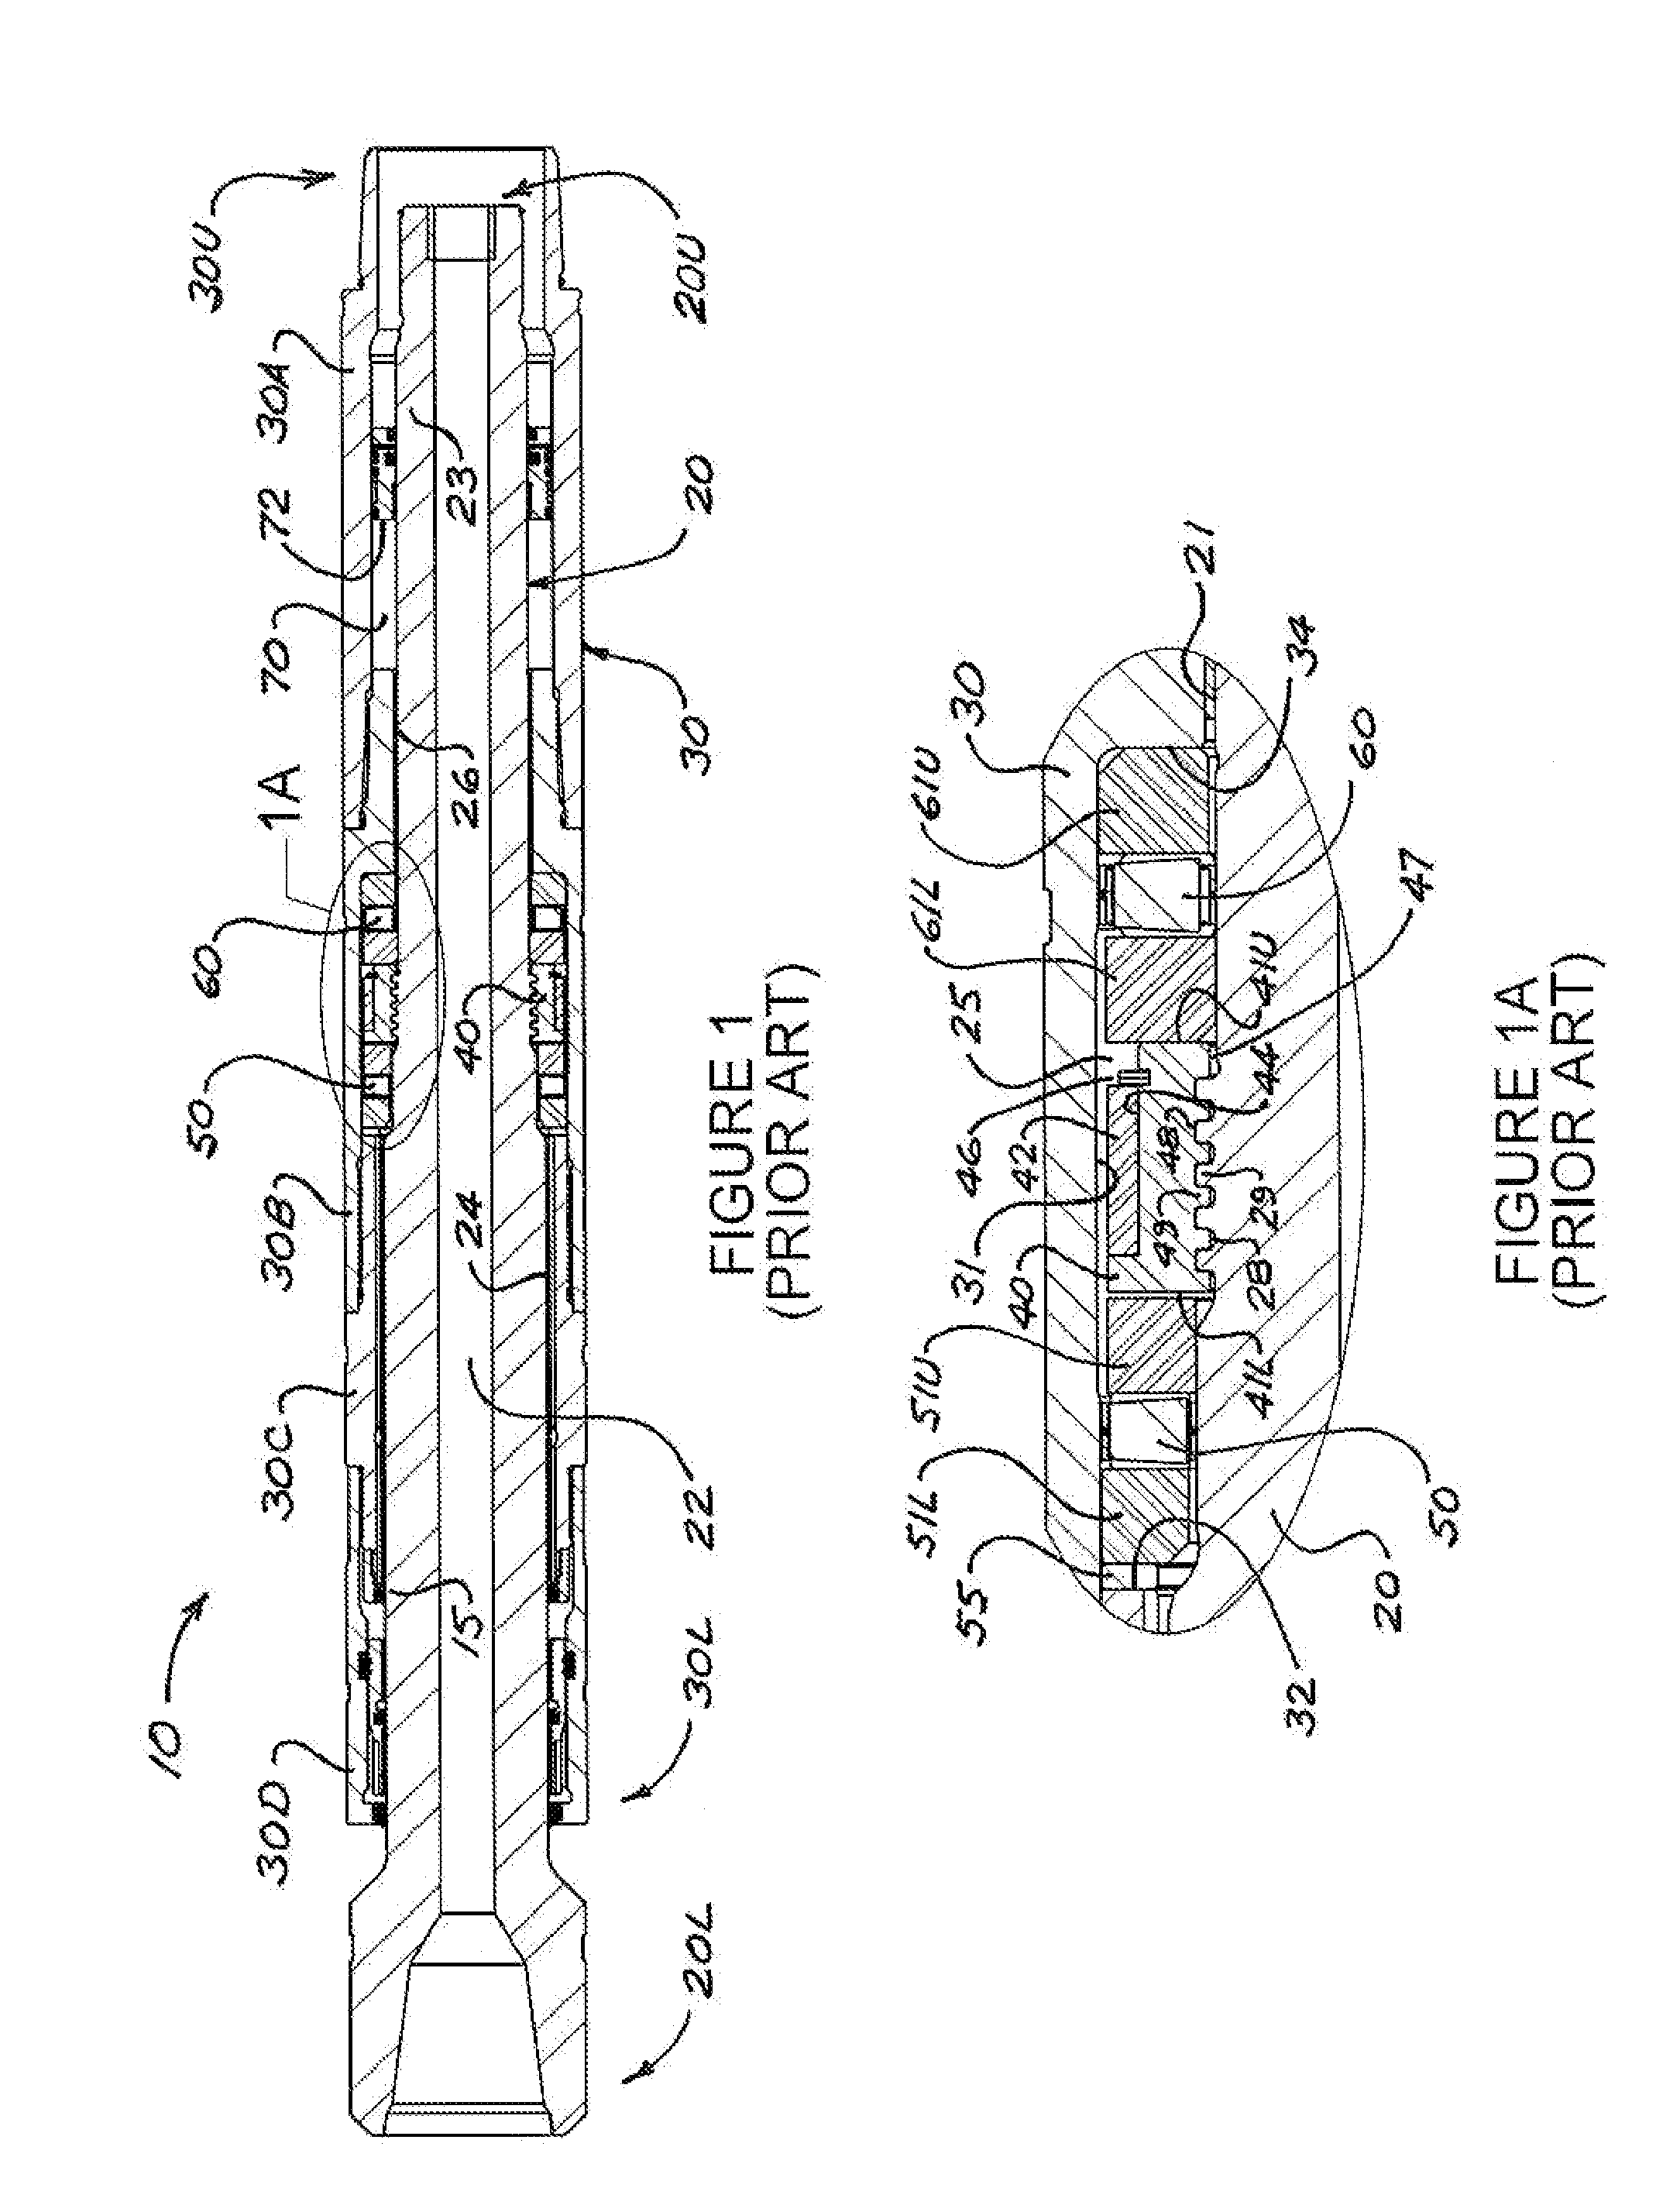 Oil-Sealed Mud Motor Bearing Assembly With Mud-Lubricated Off-Bottom Thrust Bearing